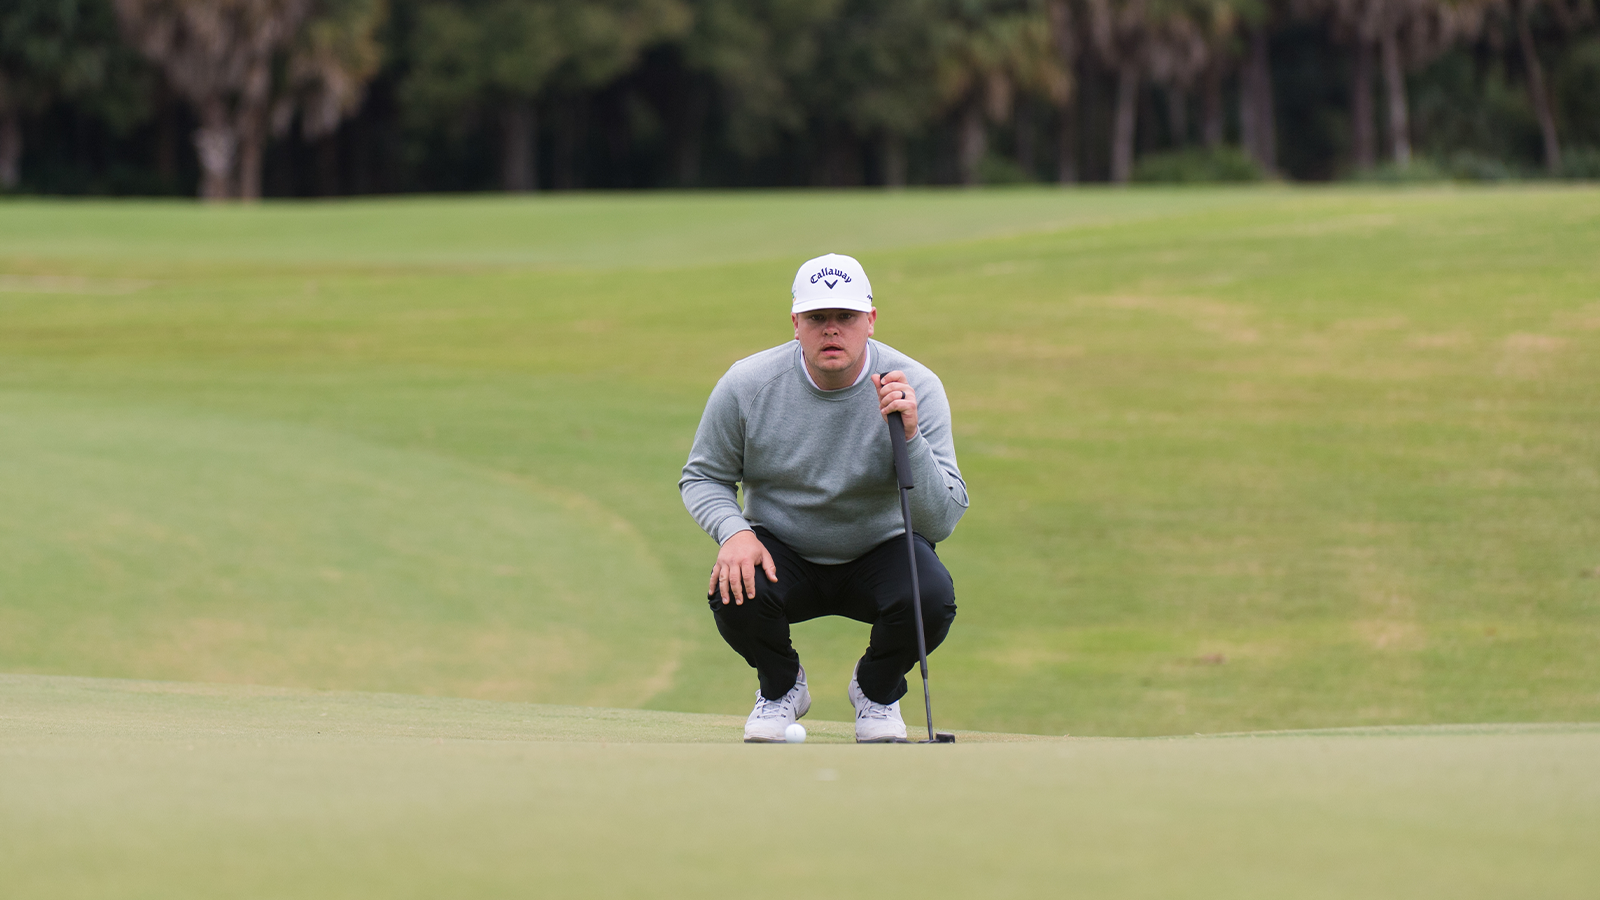 Colin Inglis reads his putt on the first hole during the final round for the 43rd National Car Rental Assistant PGA Professional Championship held at the PGA Golf Club on November 17, 2019 in Port St. Lucie, Florida. (Photo by Hailey Garrett/PGA of America)